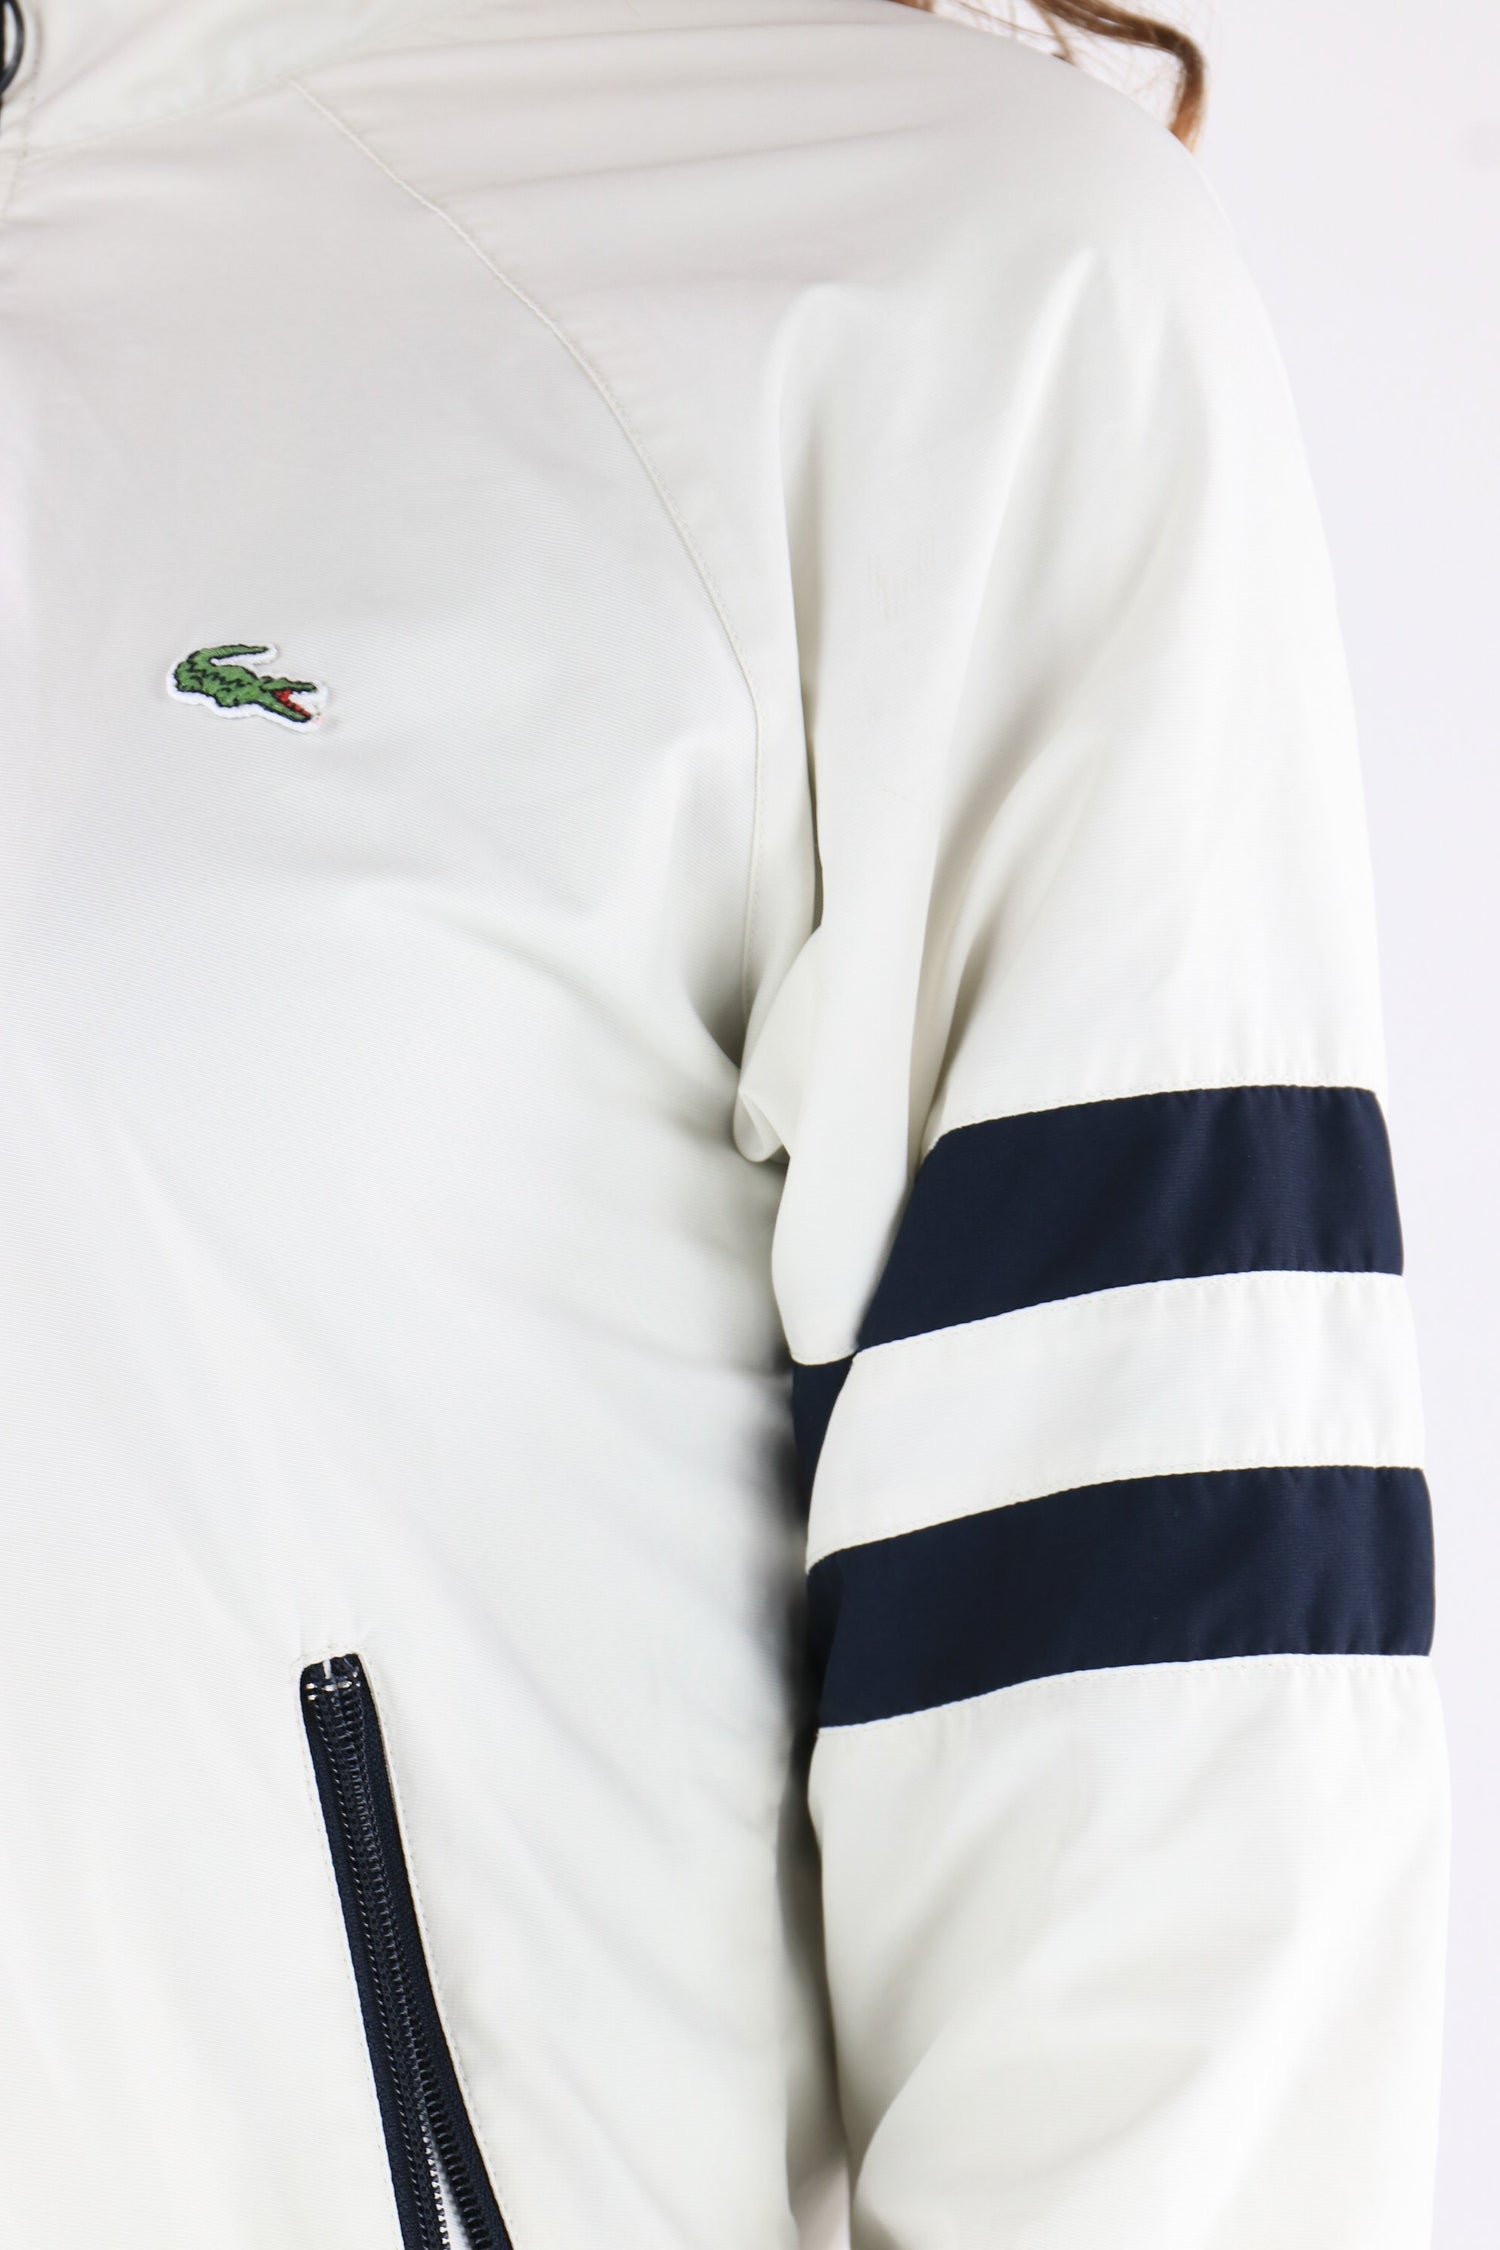 Lacoste Shell Suit Jacket Cream Small